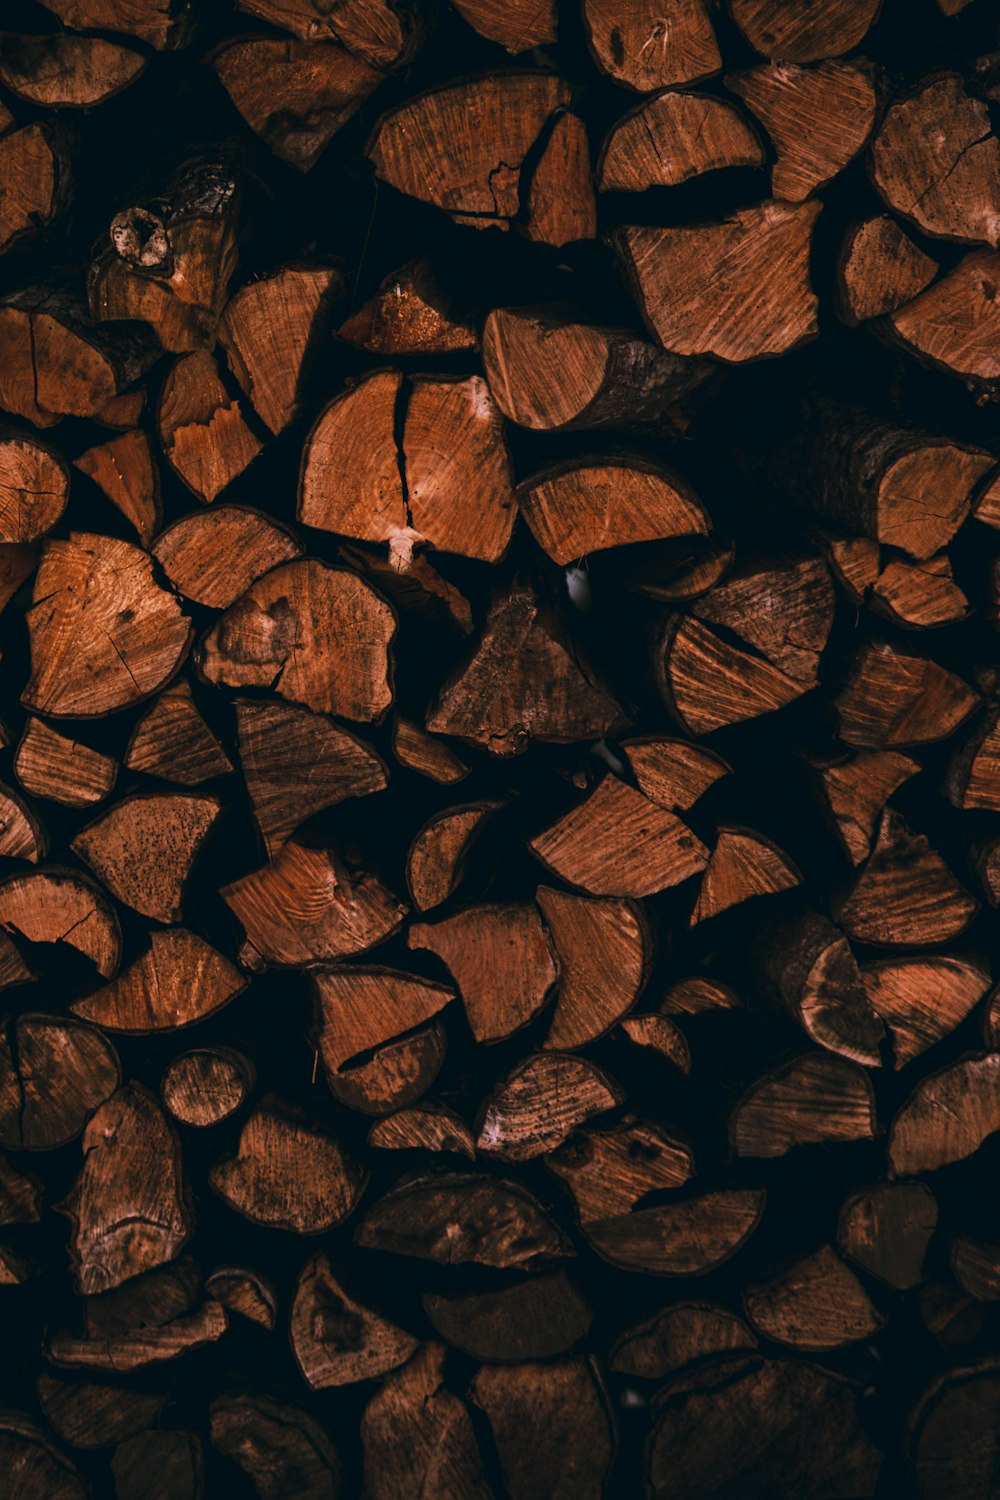 a pile of wood that is brown in color